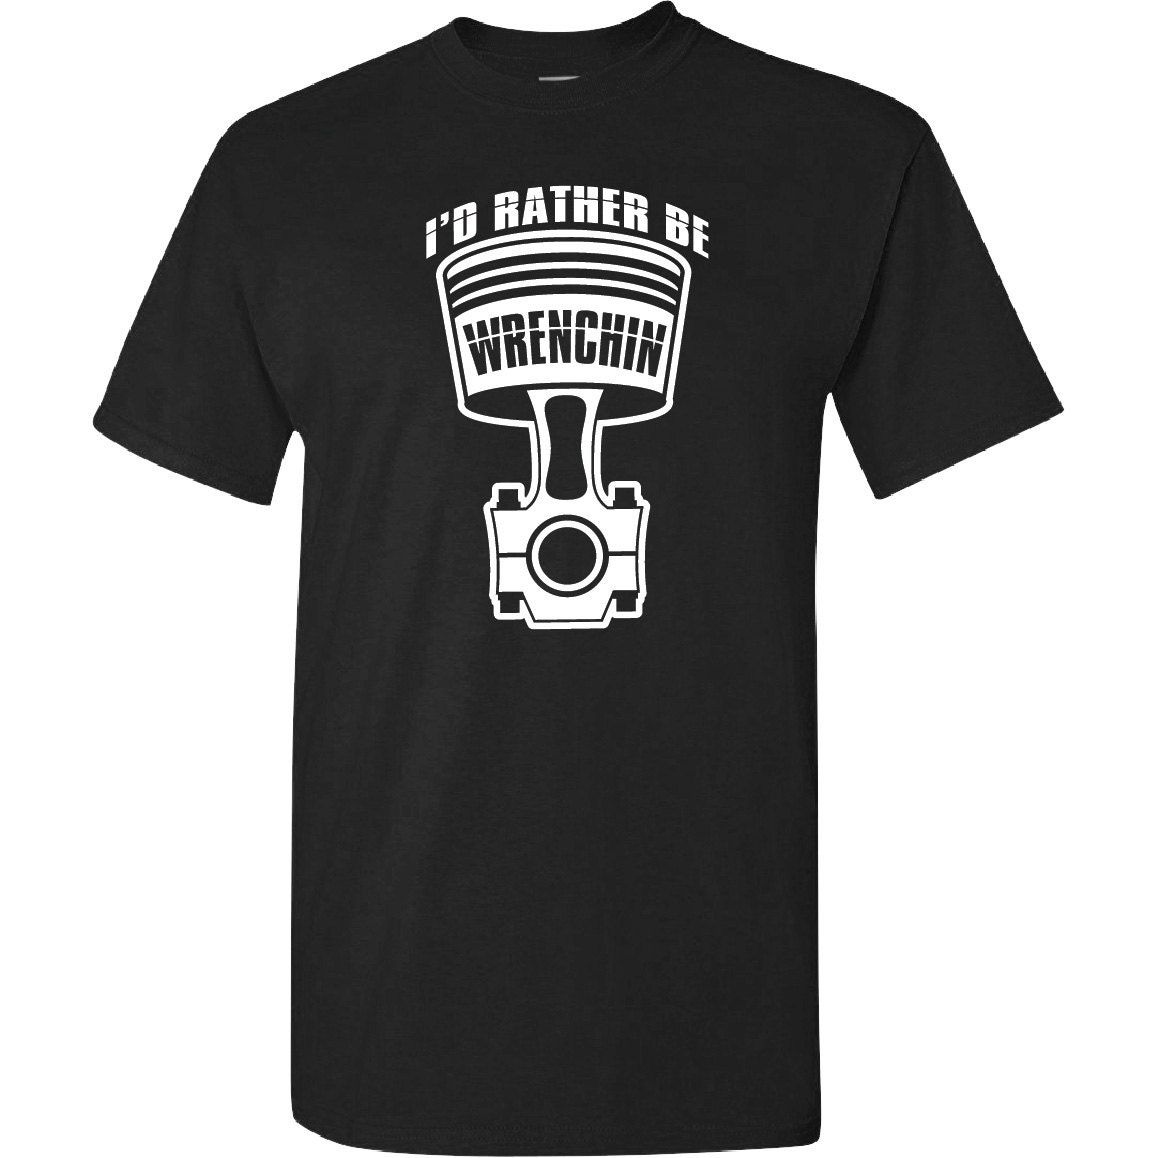 Id Rather Be Wrenching Funny Cool Mechanics Car Lover Engine Builder T-Shirt